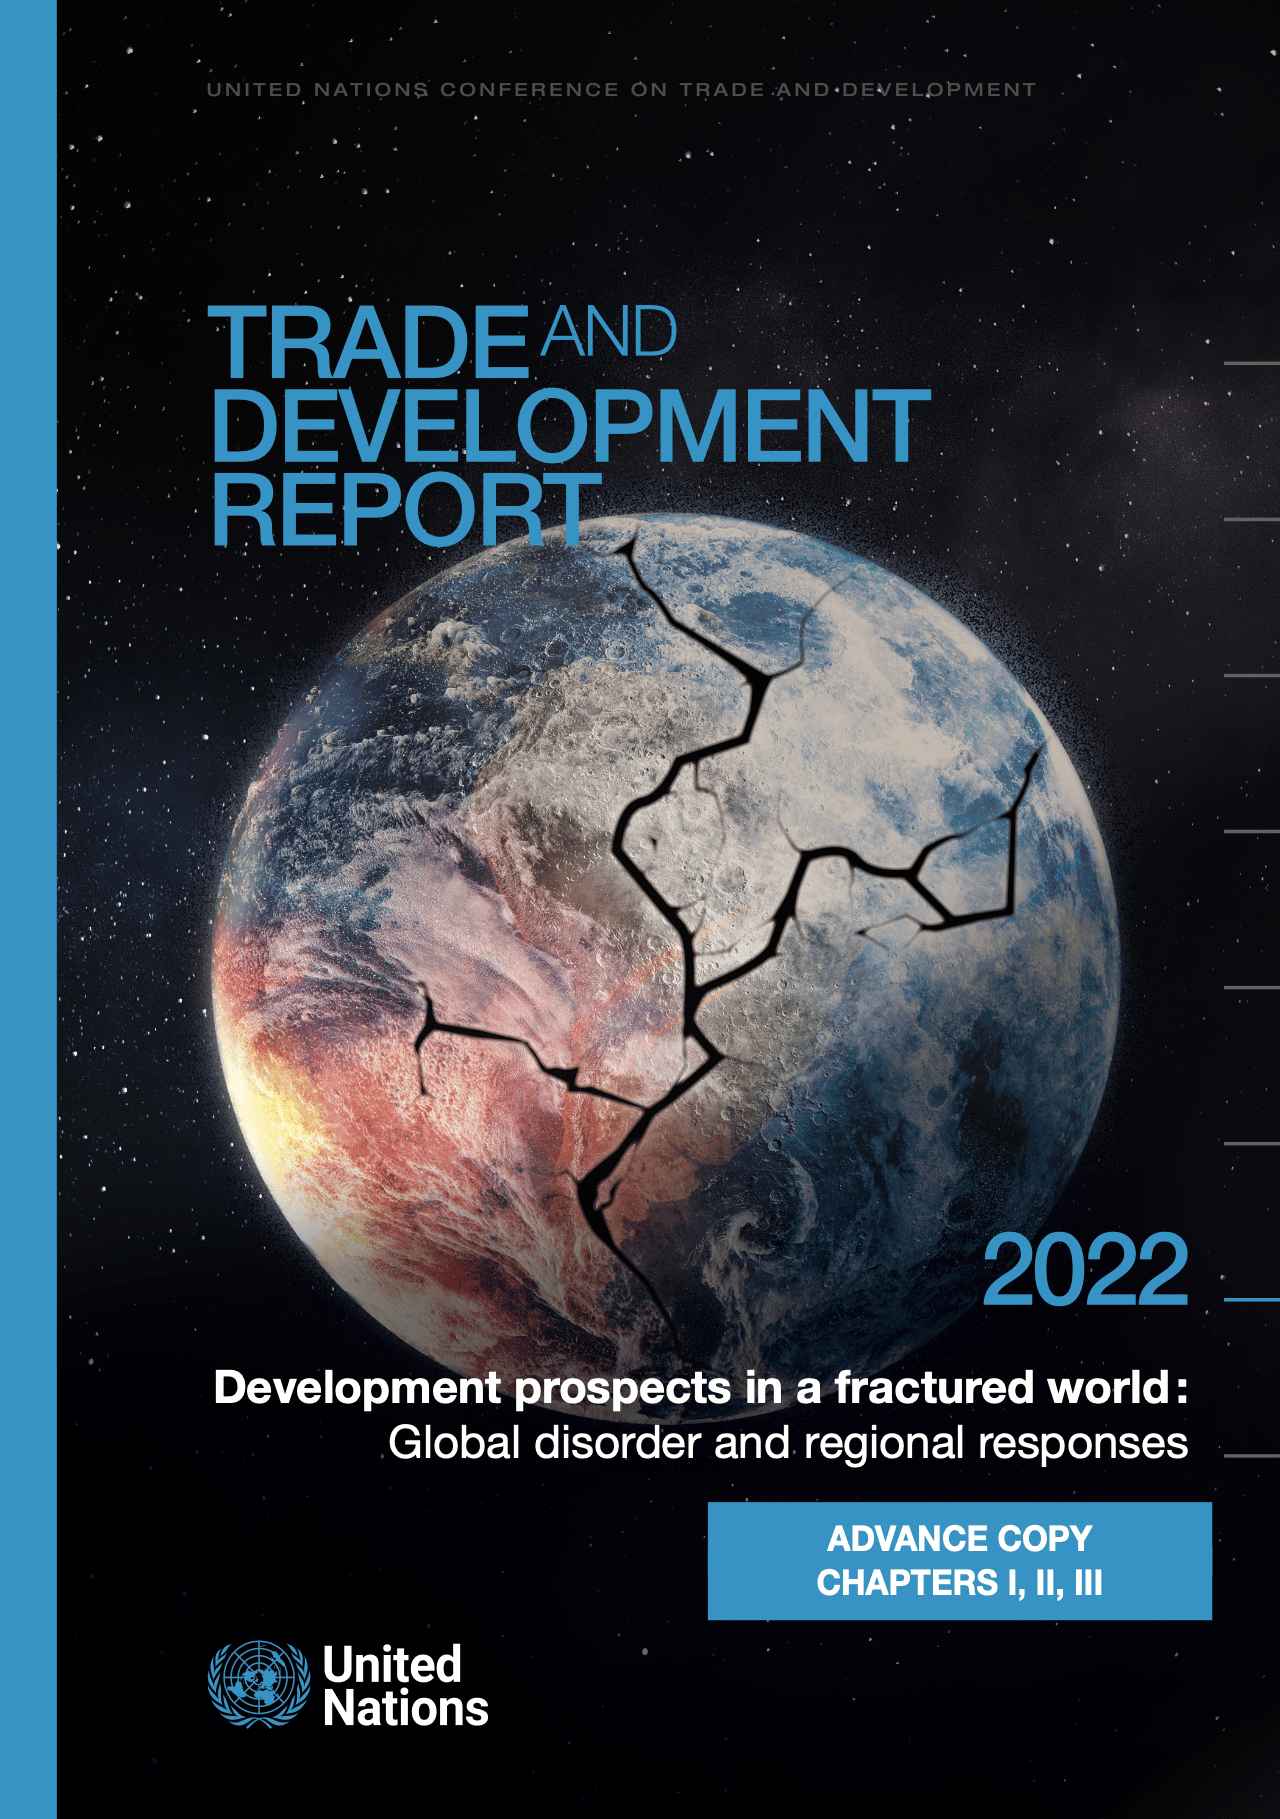 UNCTAD 2022 Trade and Development Report - South-South Galaxy